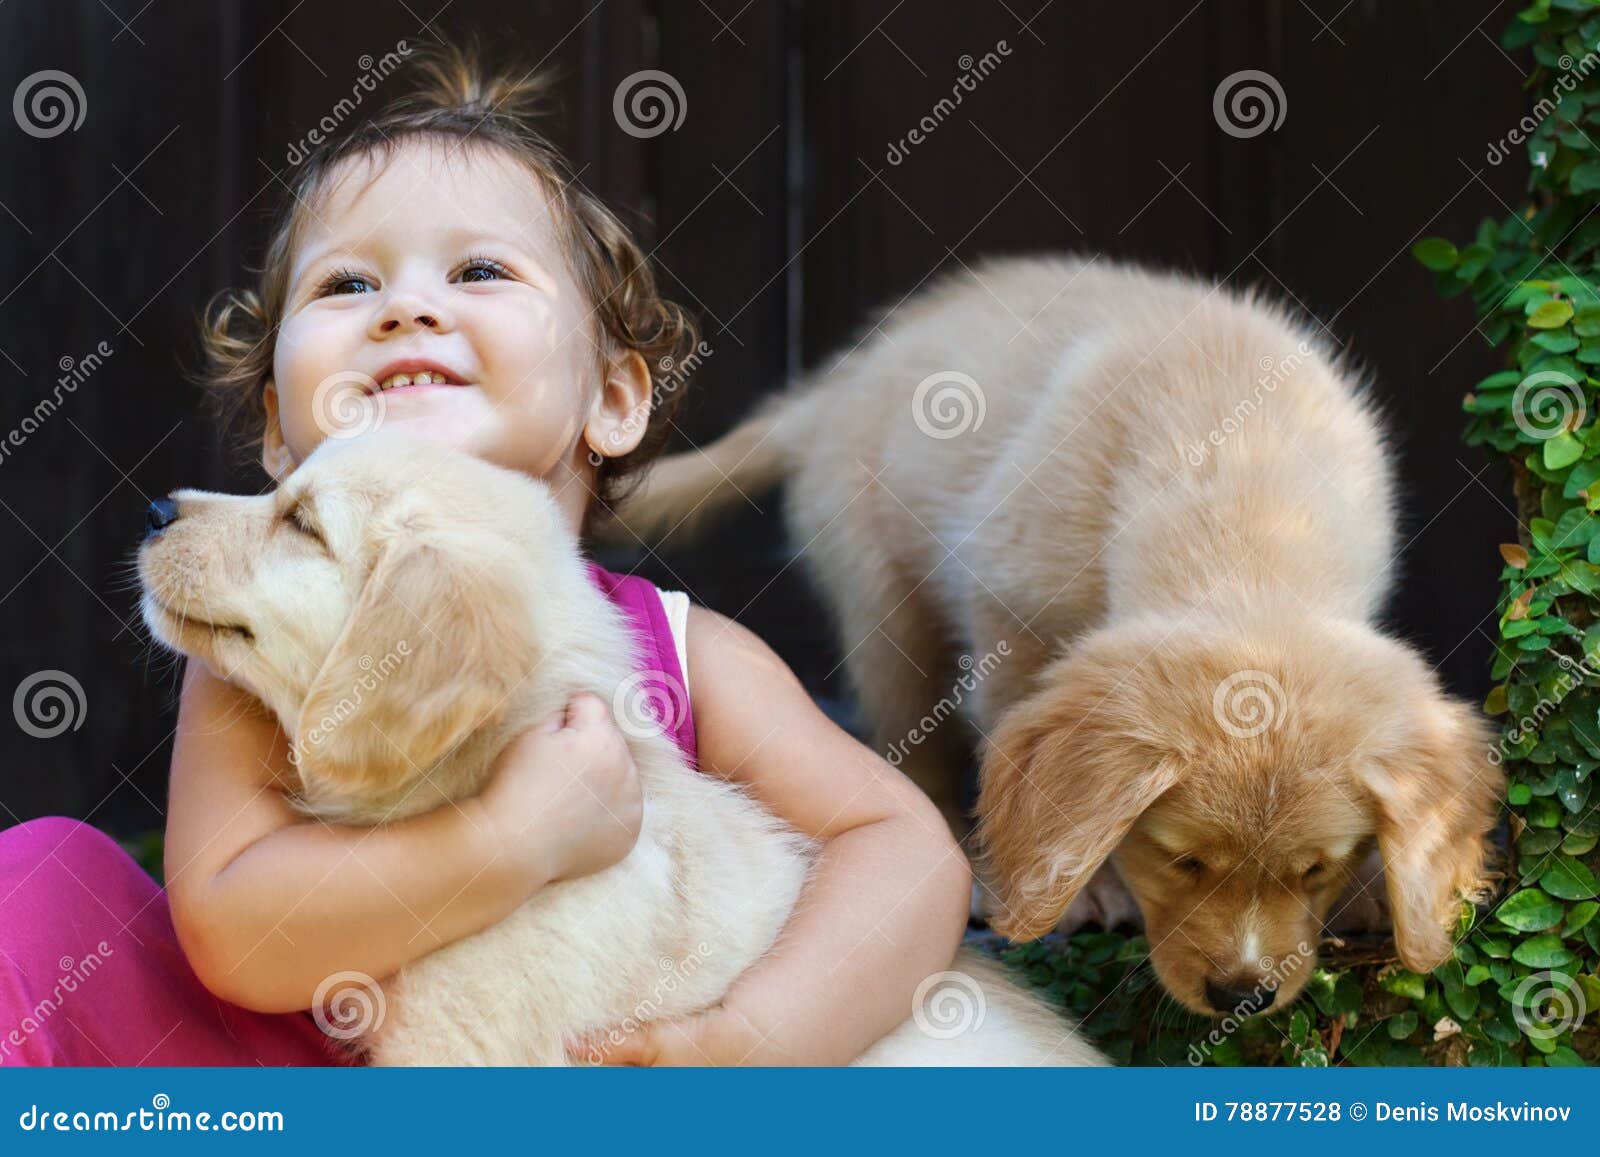 happy child play and hug family pet - labrador puppy